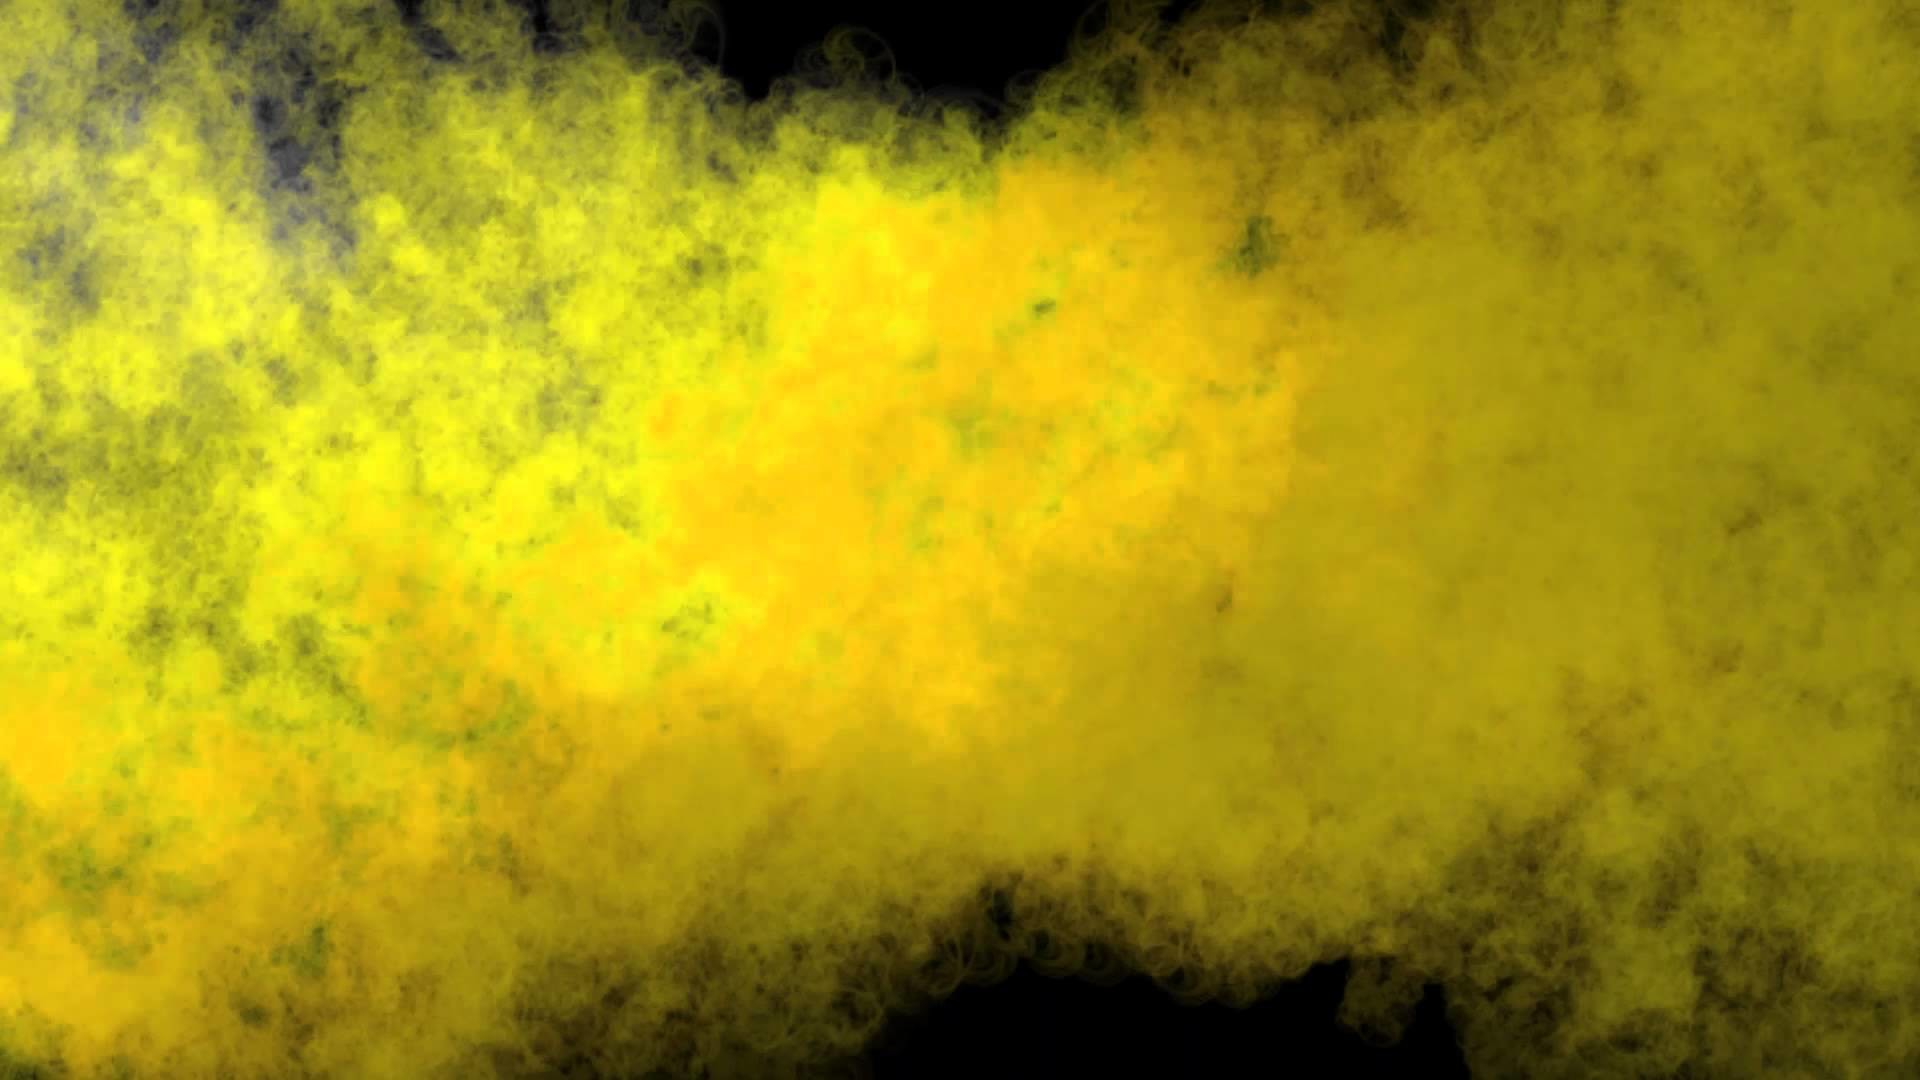 Black And Yellow Hd Wallpaper (65+ Images)